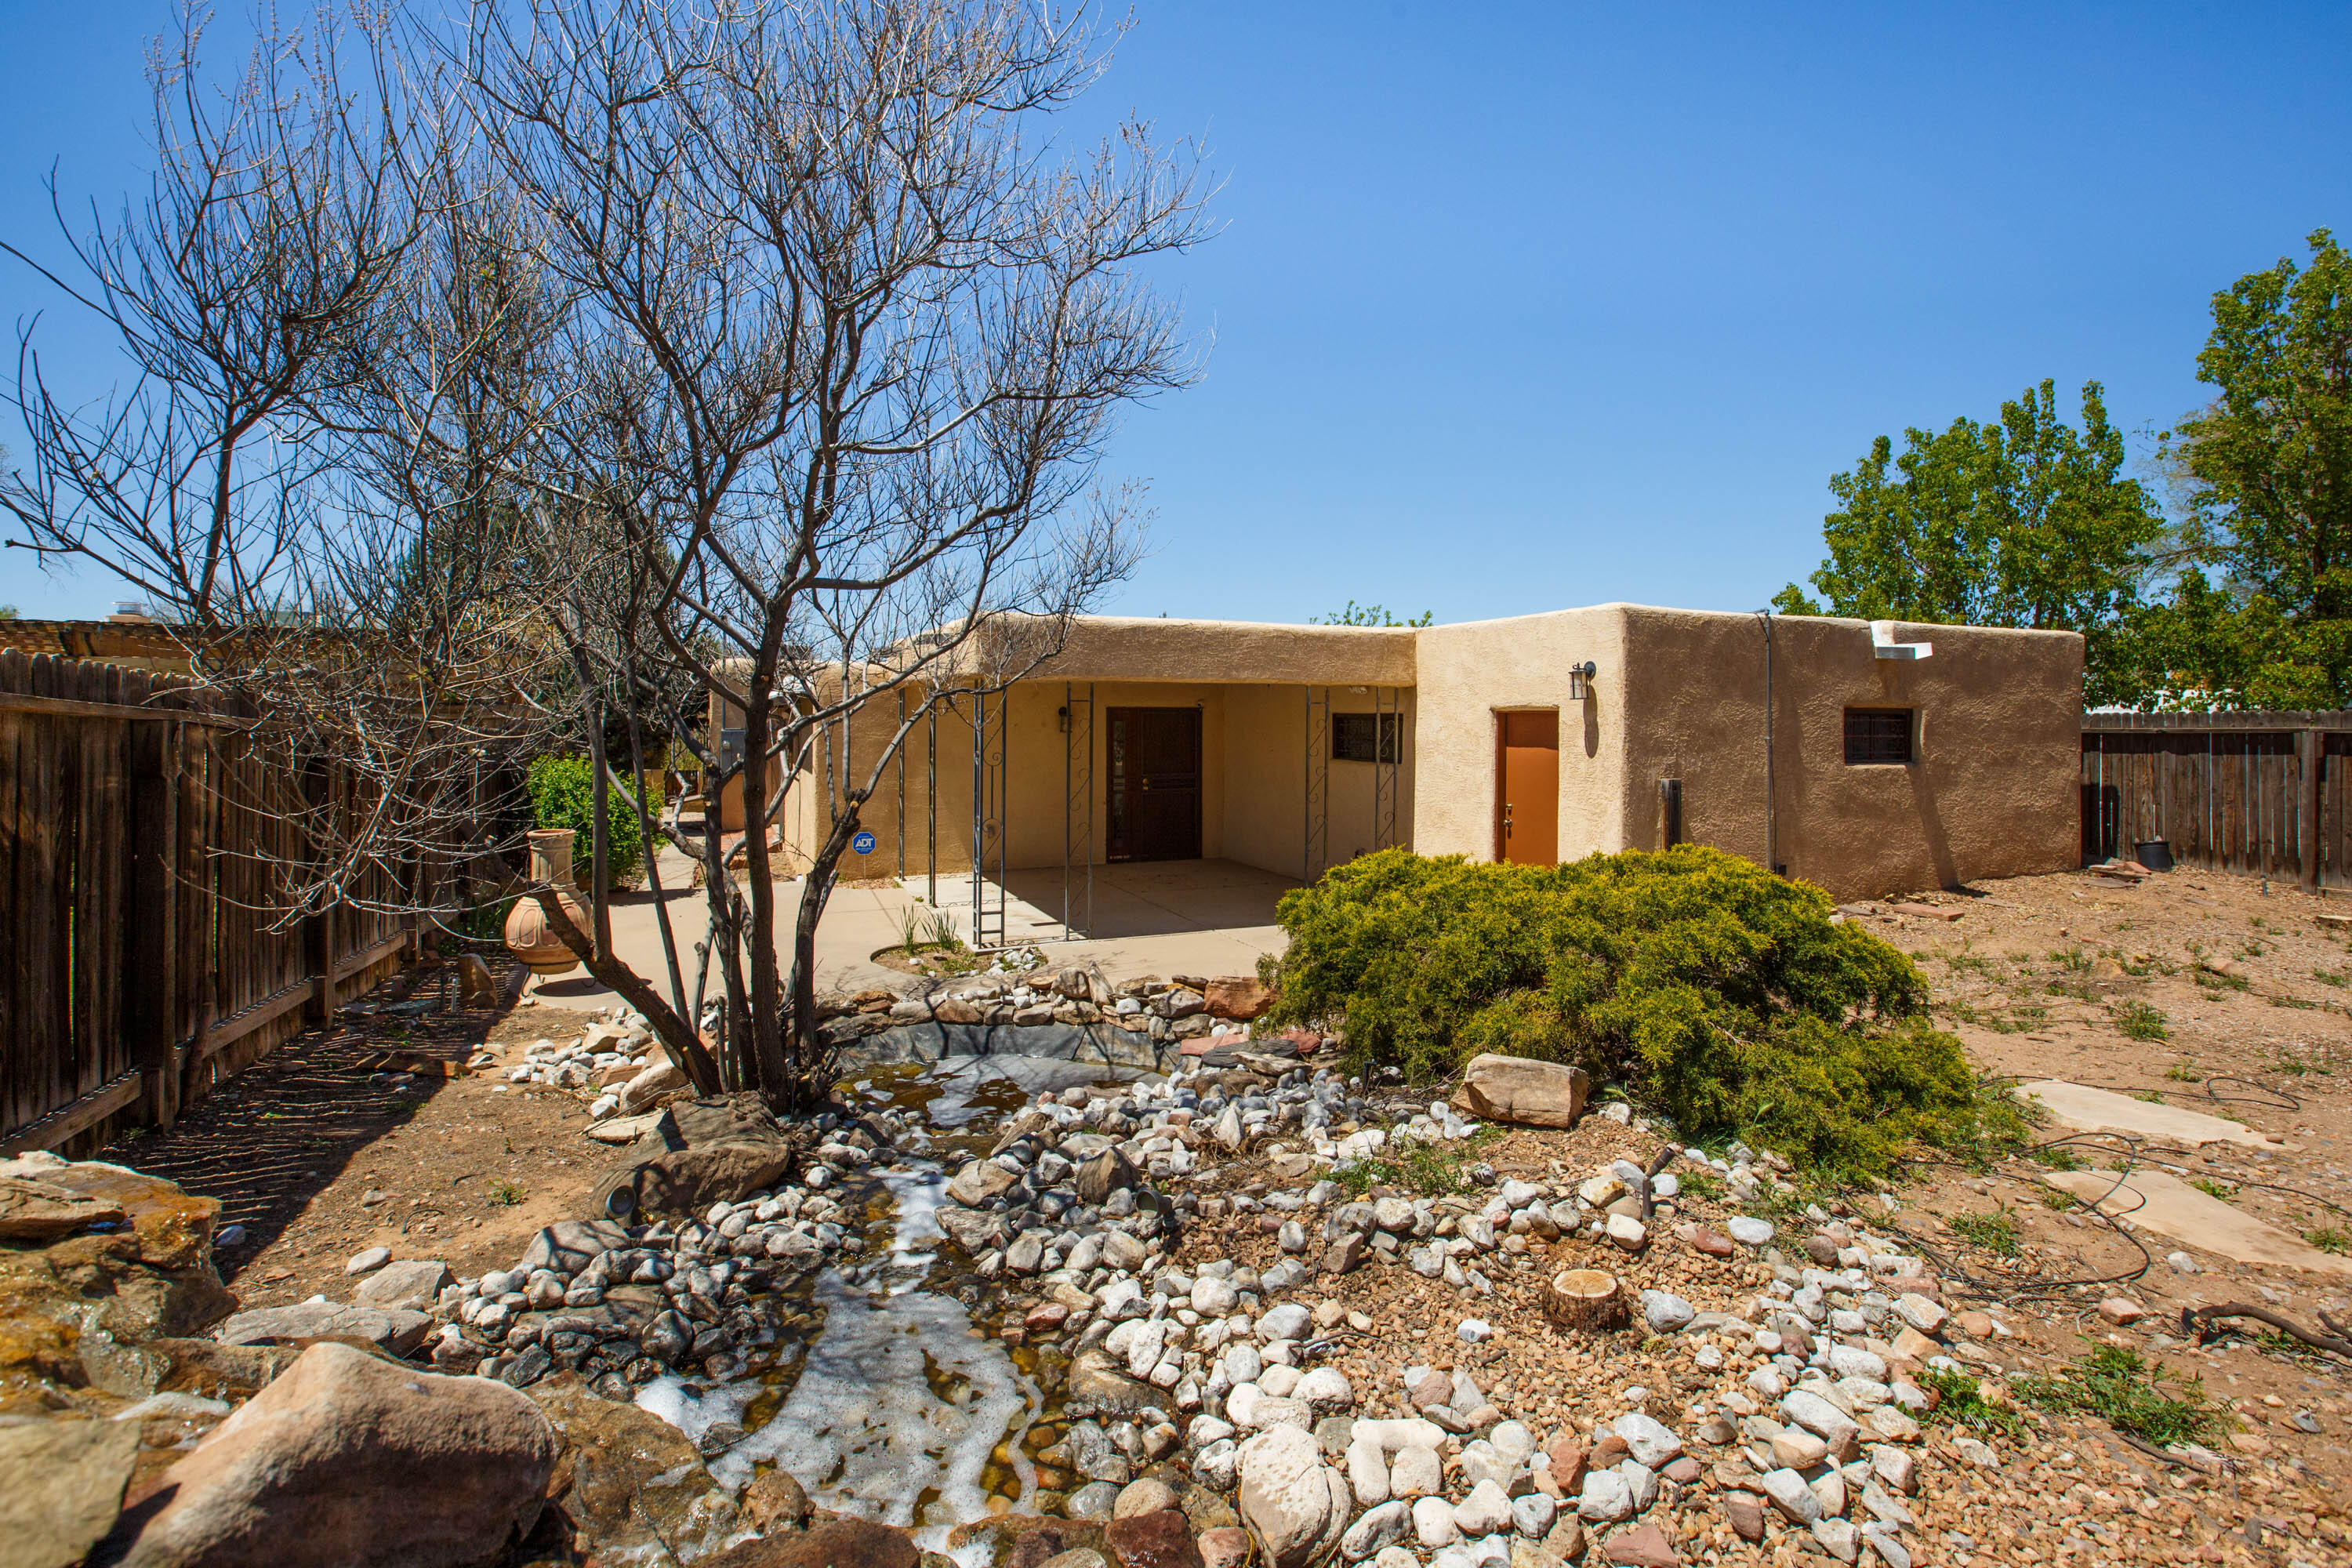 400 Amherst Drive SE, Albuquerque, New Mexico 87106, 2 Bedrooms Bedrooms, ,2 BathroomsBathrooms,Residential,For Sale,400 Amherst Drive SE,1061008